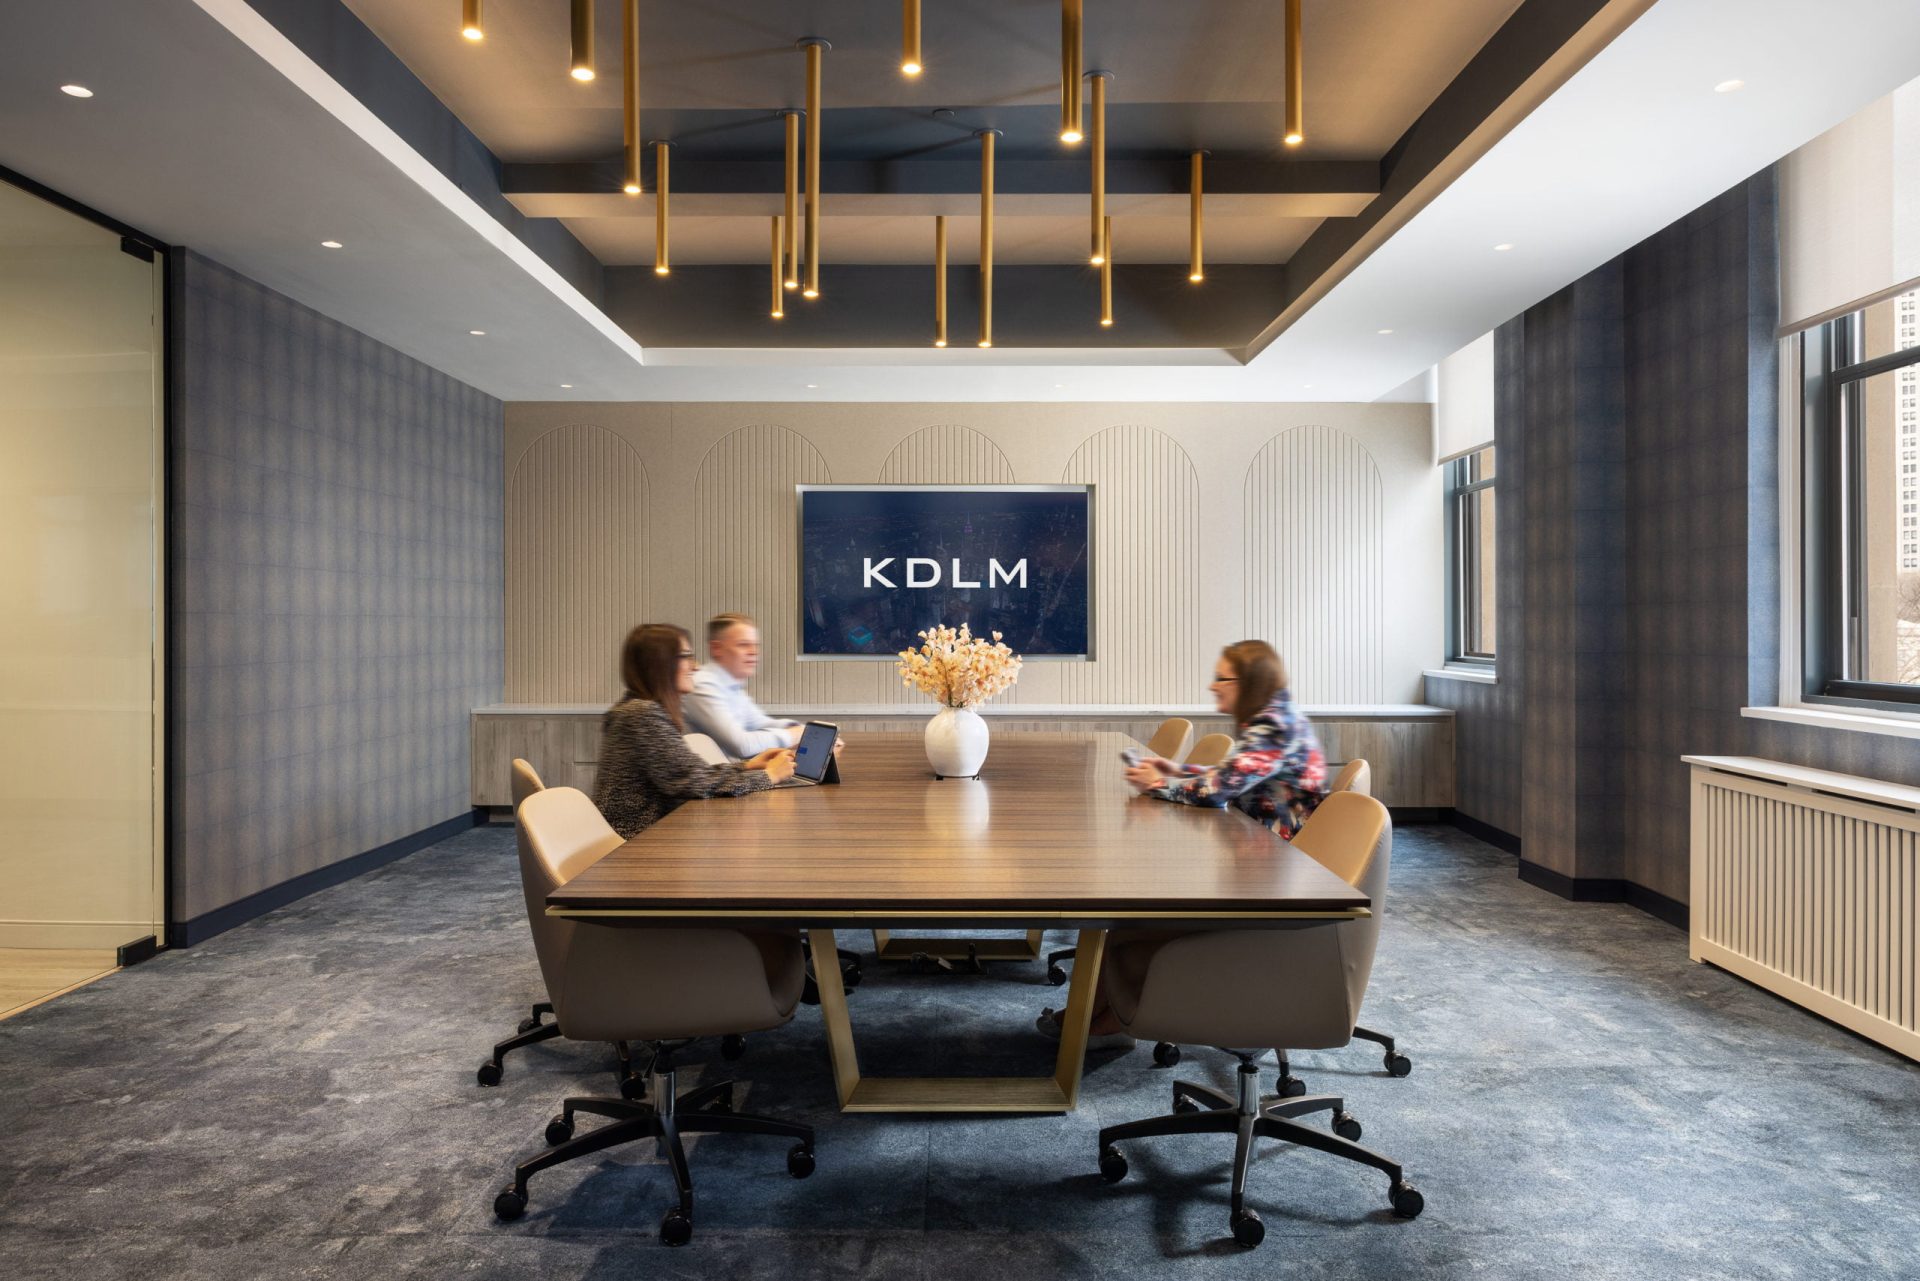 Boardroom at KDLM which was recently renovated and updated